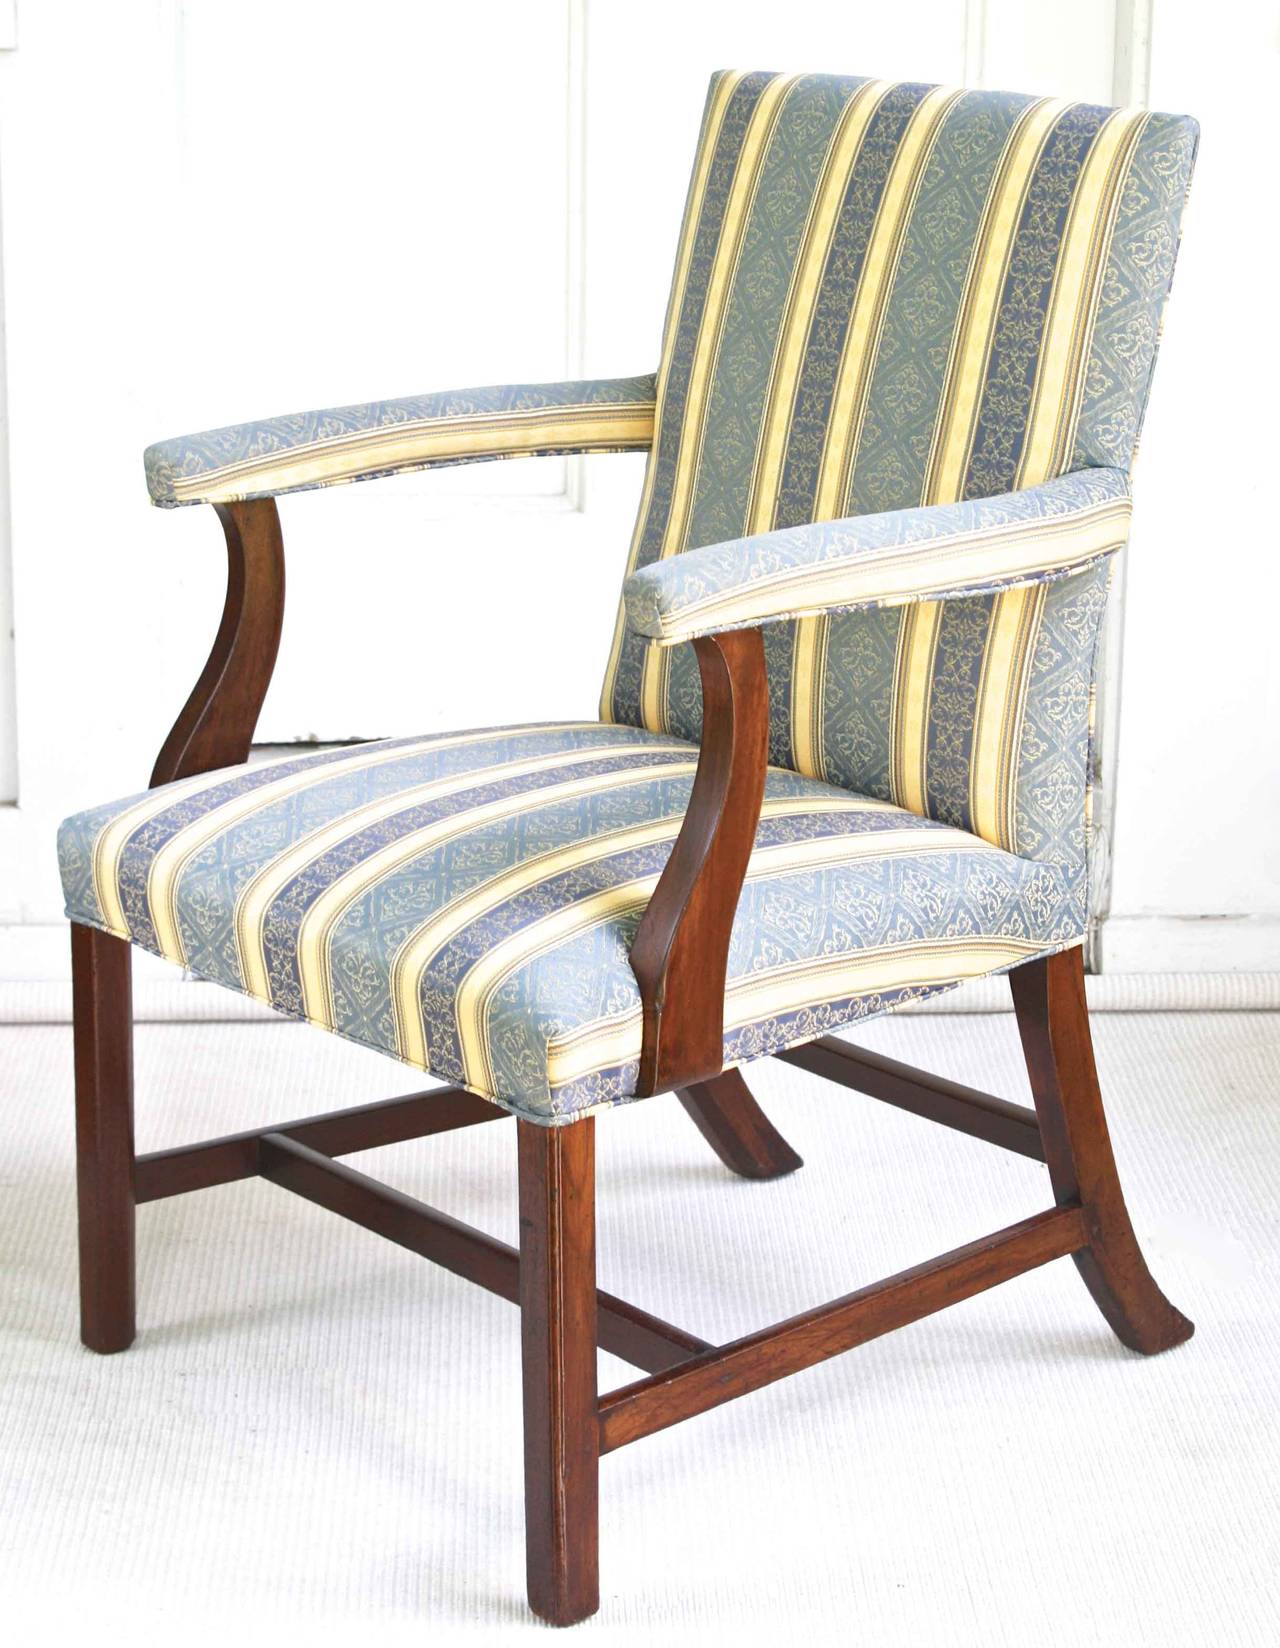 American New England Federal Period Library Armchair